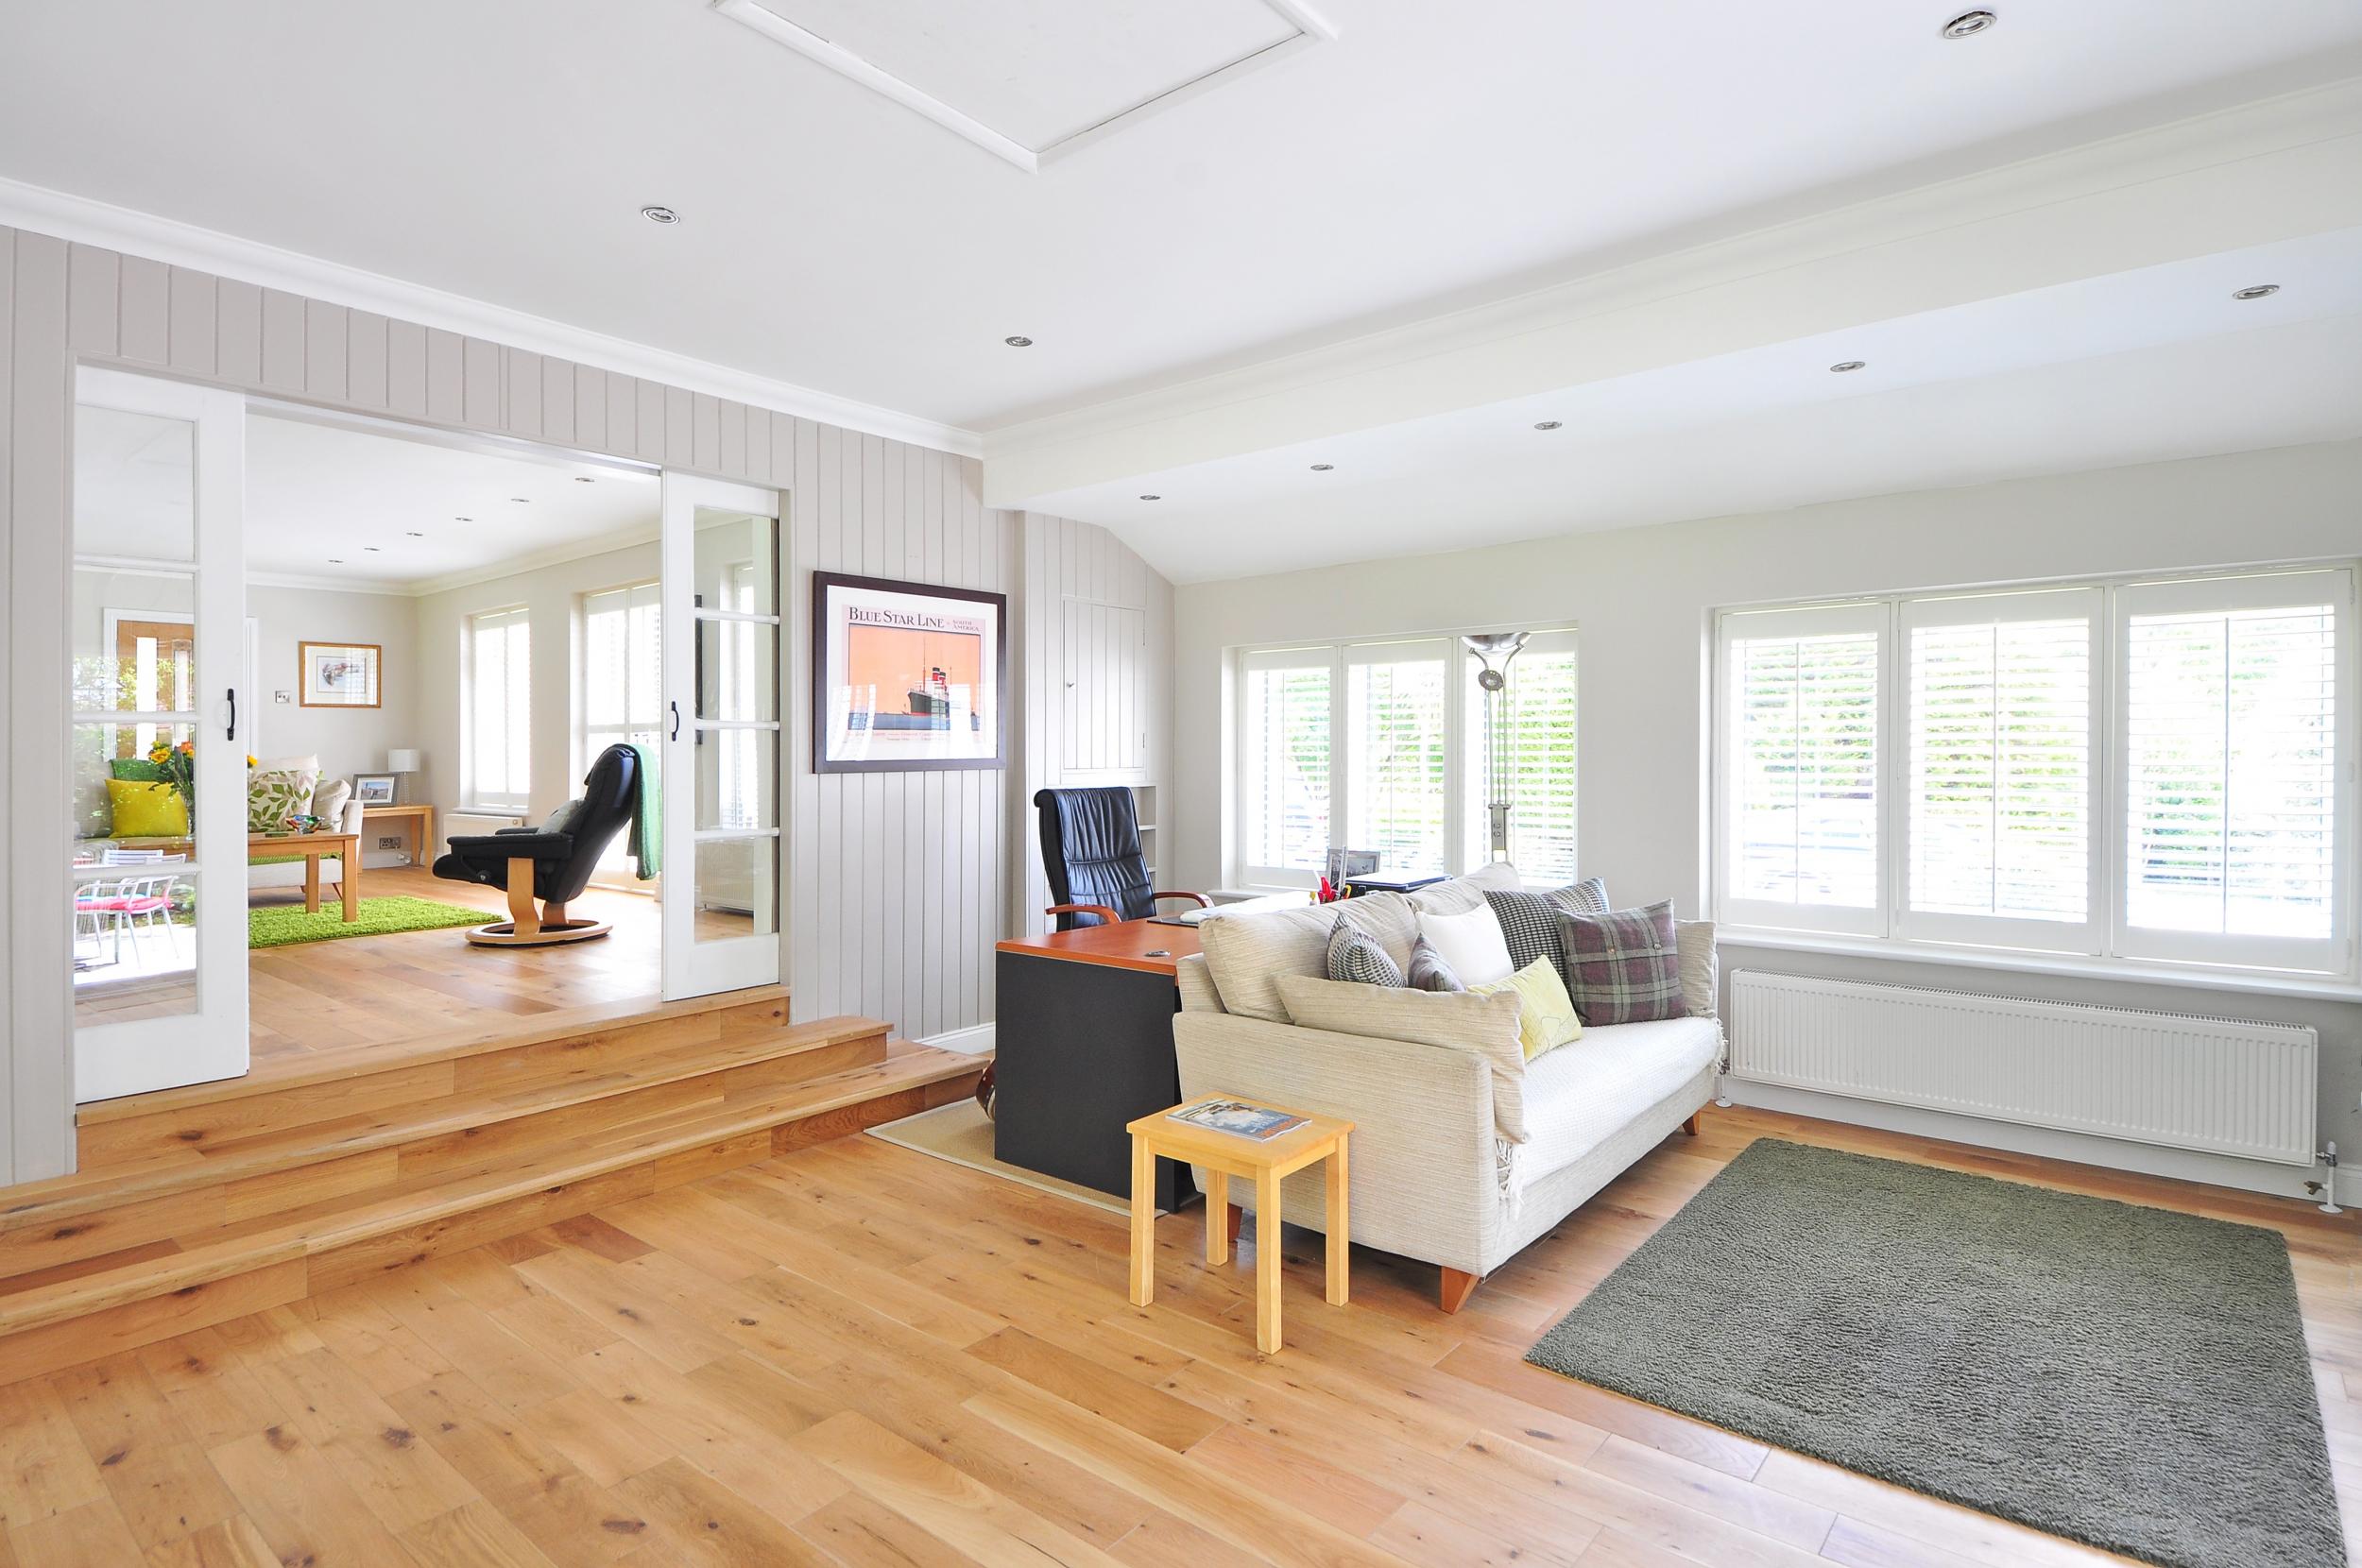 Get Your Hardwood Floors Restored By Eco-Friendly Cleaners In Glendale, CA